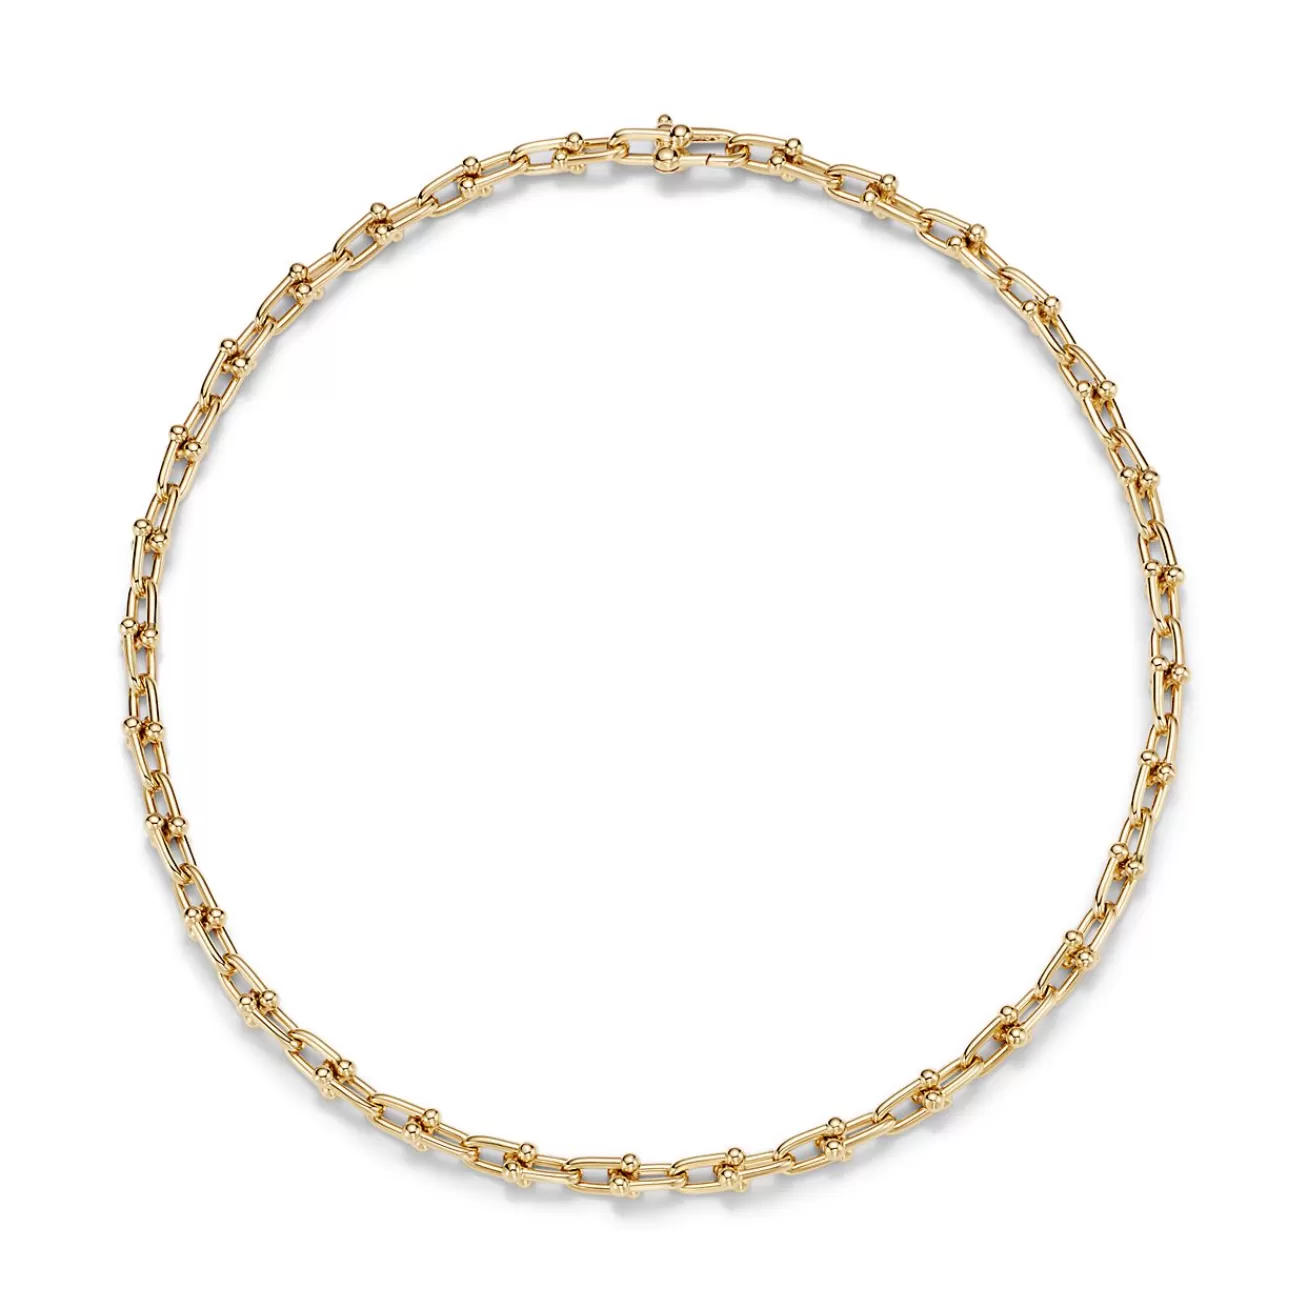 Tiffany & Co. Tiffany HardWear Small Link Necklace in Yellow Gold | ^ Necklaces & Pendants | Men's Jewelry